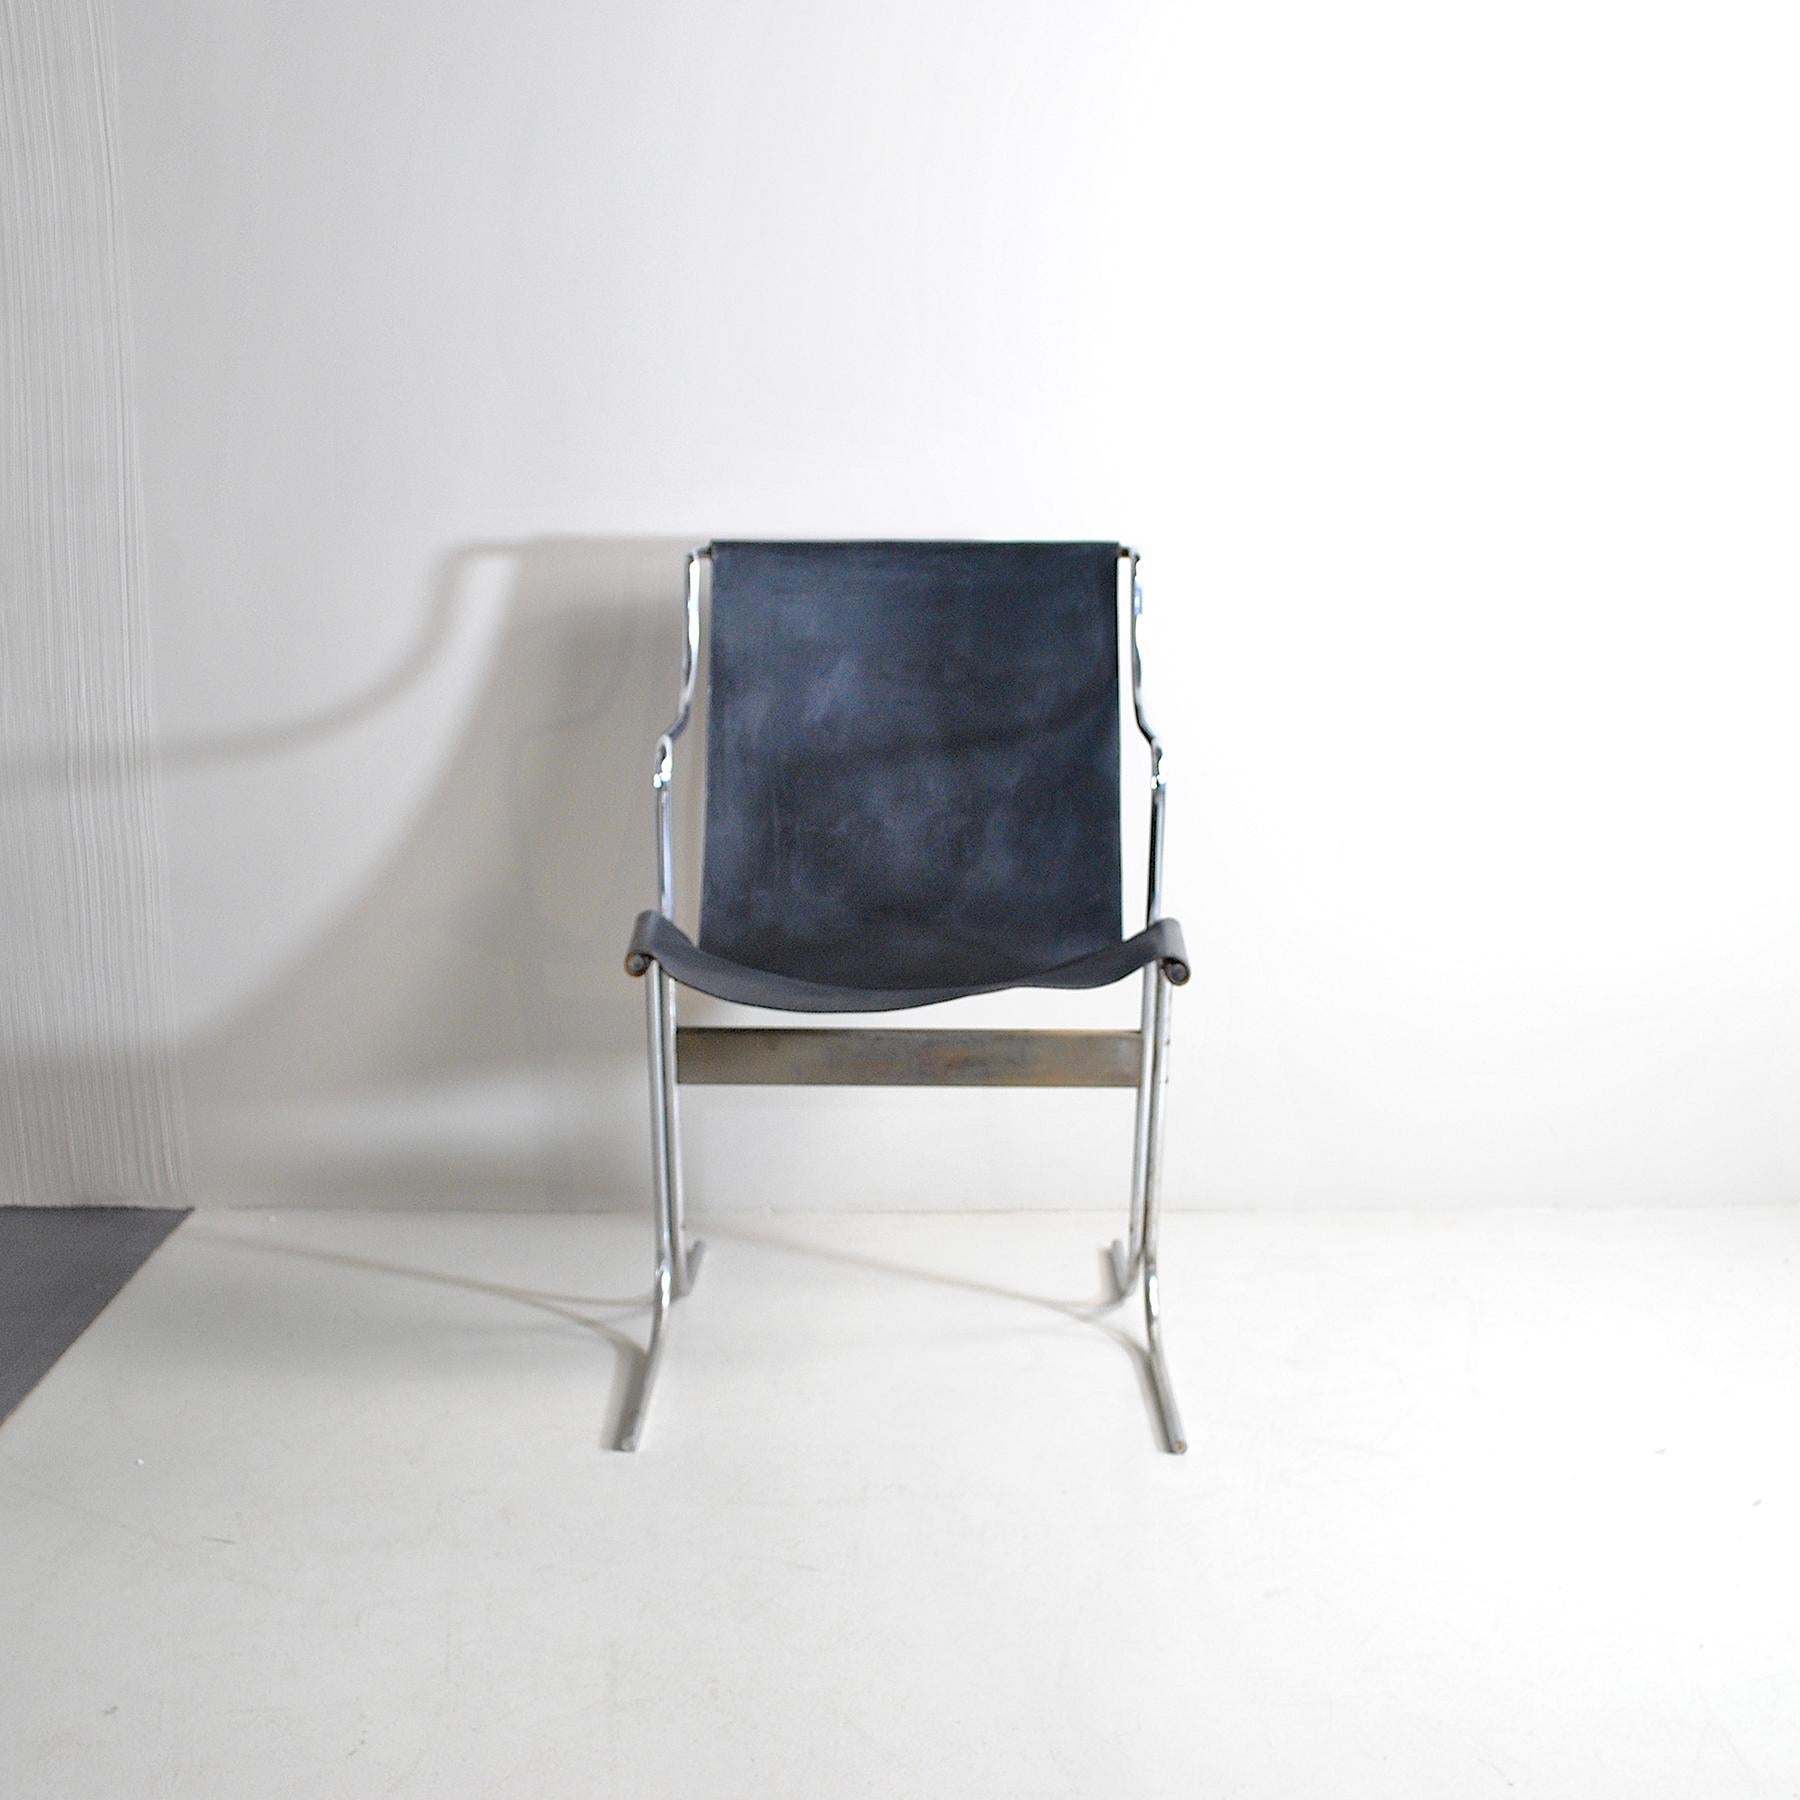 1960s design chair with chromed steel tubular structure with original leather seat.